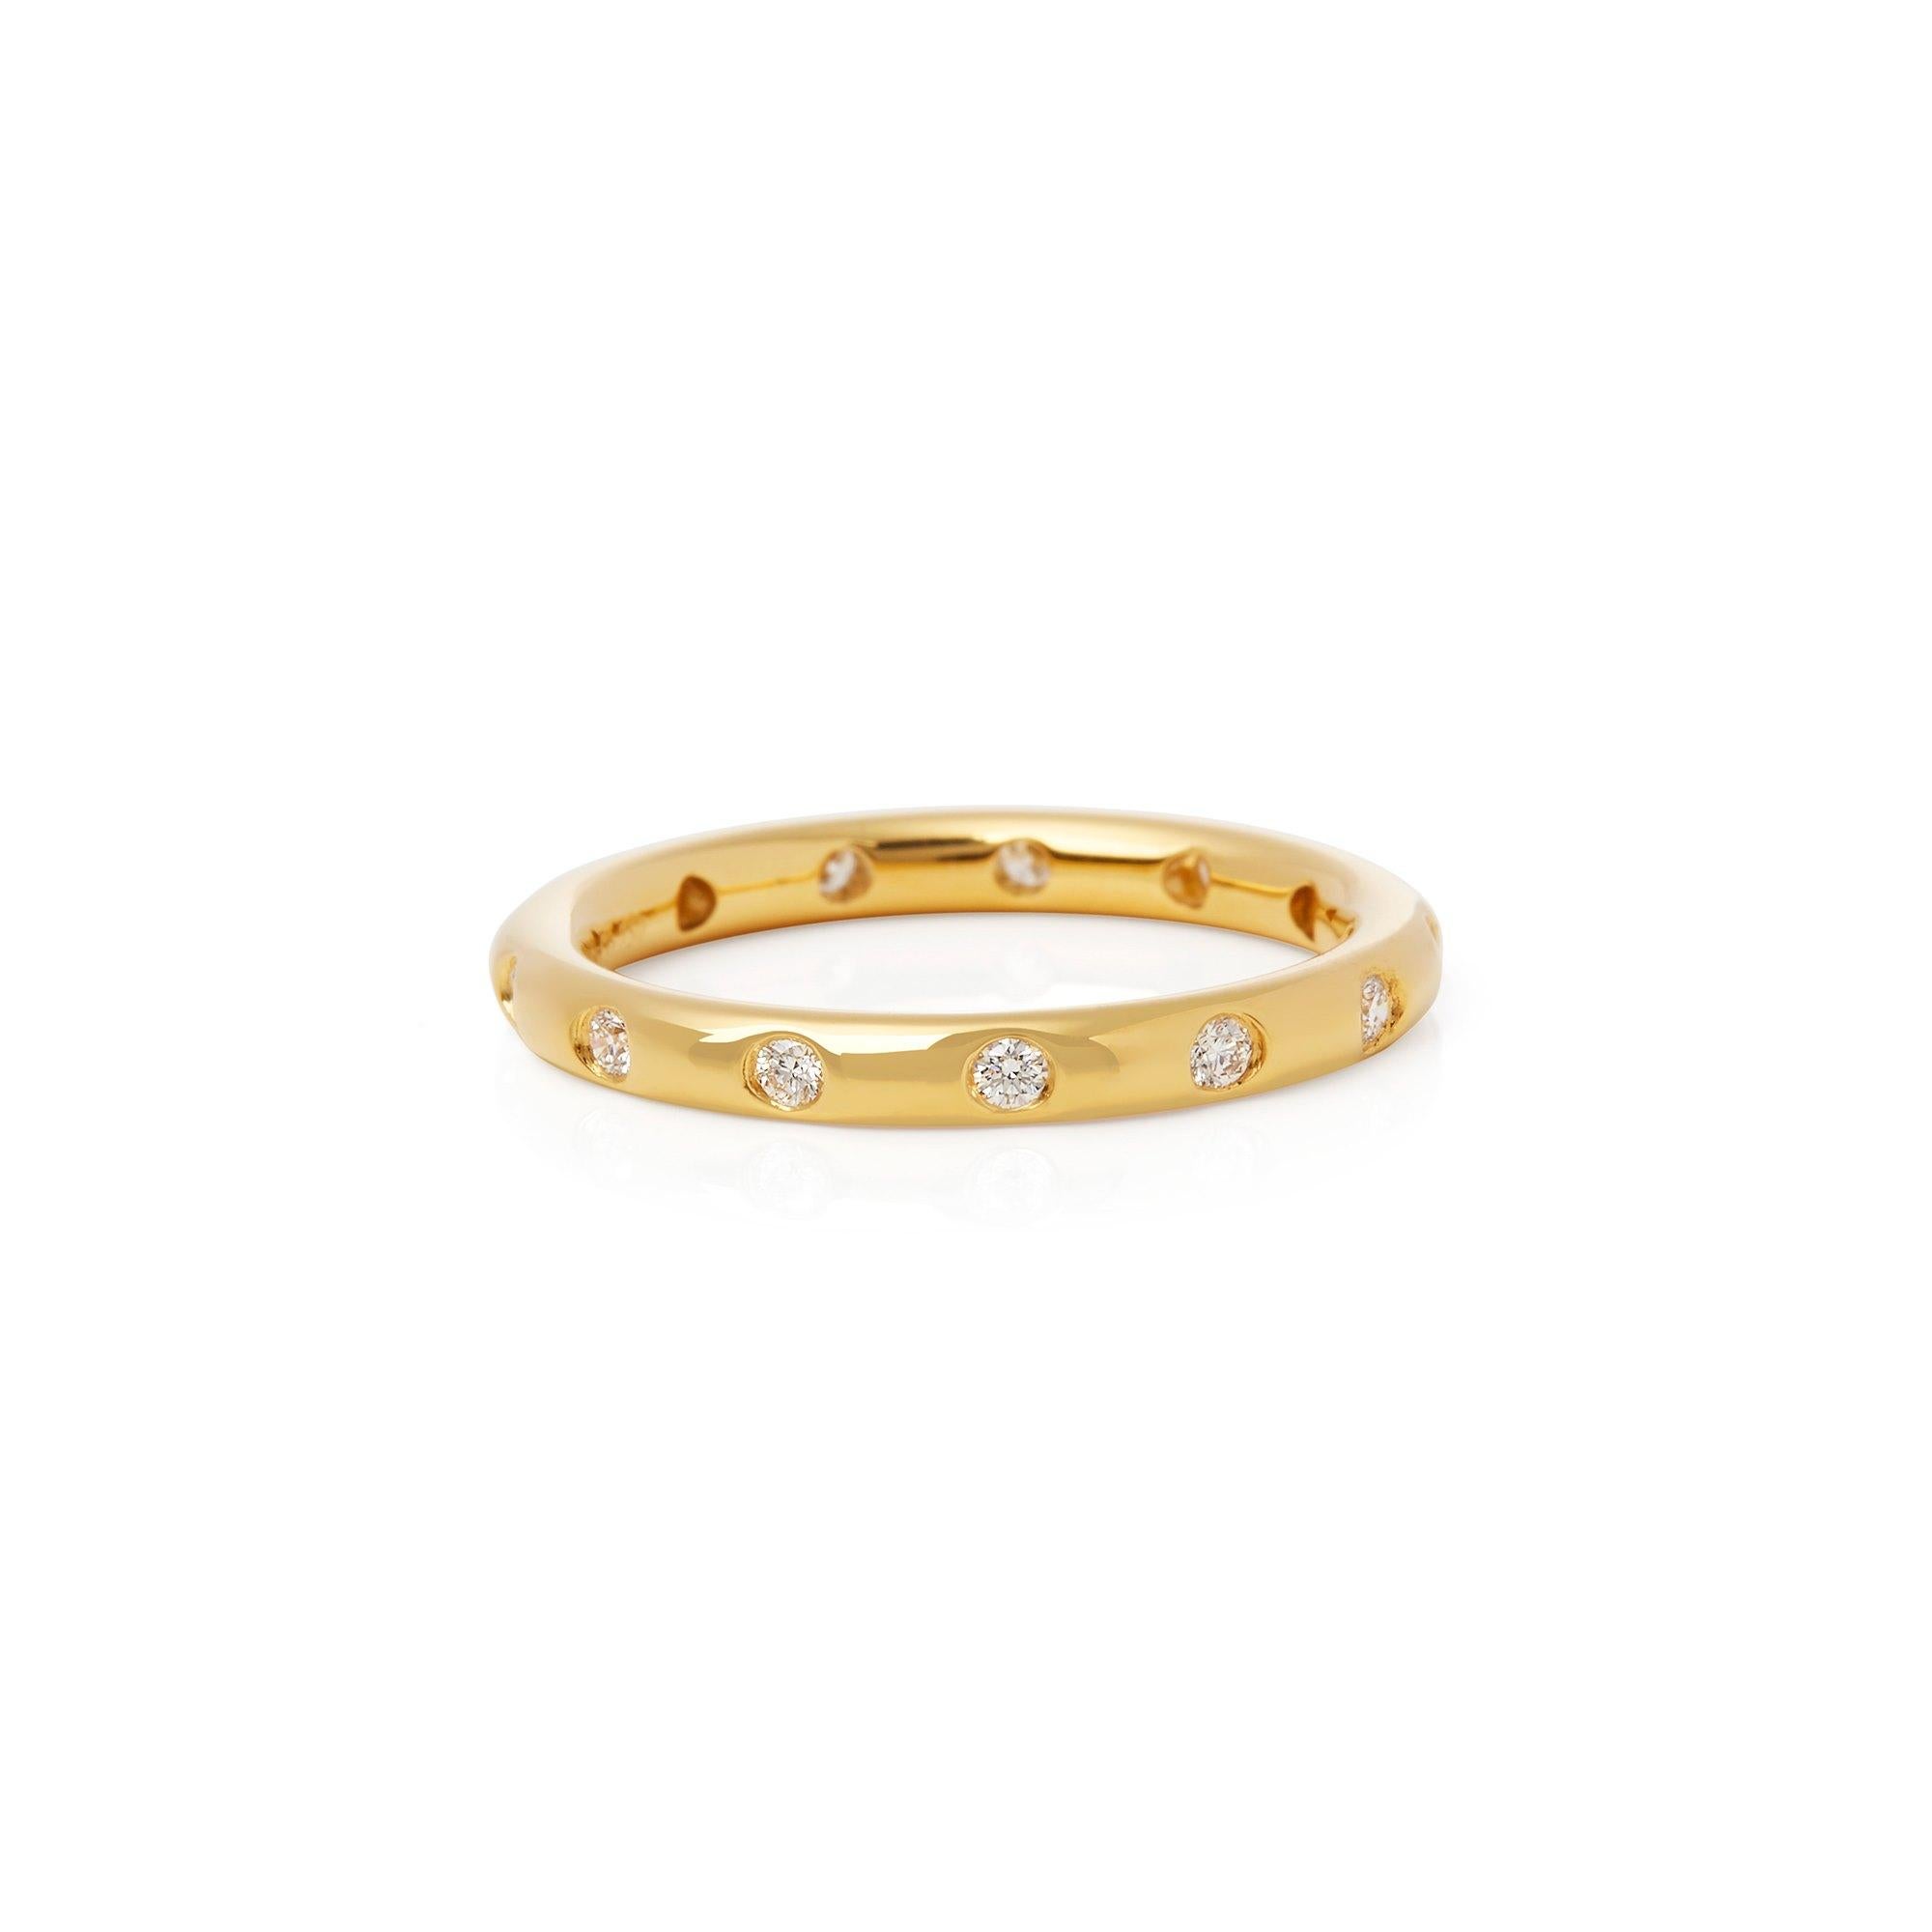 This Wedding Ring by Elsa Peretti for Tiffany & Co features Thirteen Round Brilliant Cut Diamonds Totalling 0.26cts. Set in 18k Yellow Gold. Finger Size UK O 1/2, EU Size 55, USA Size 7. Complete with Xupes Presentation Box. Our Xupes reference is